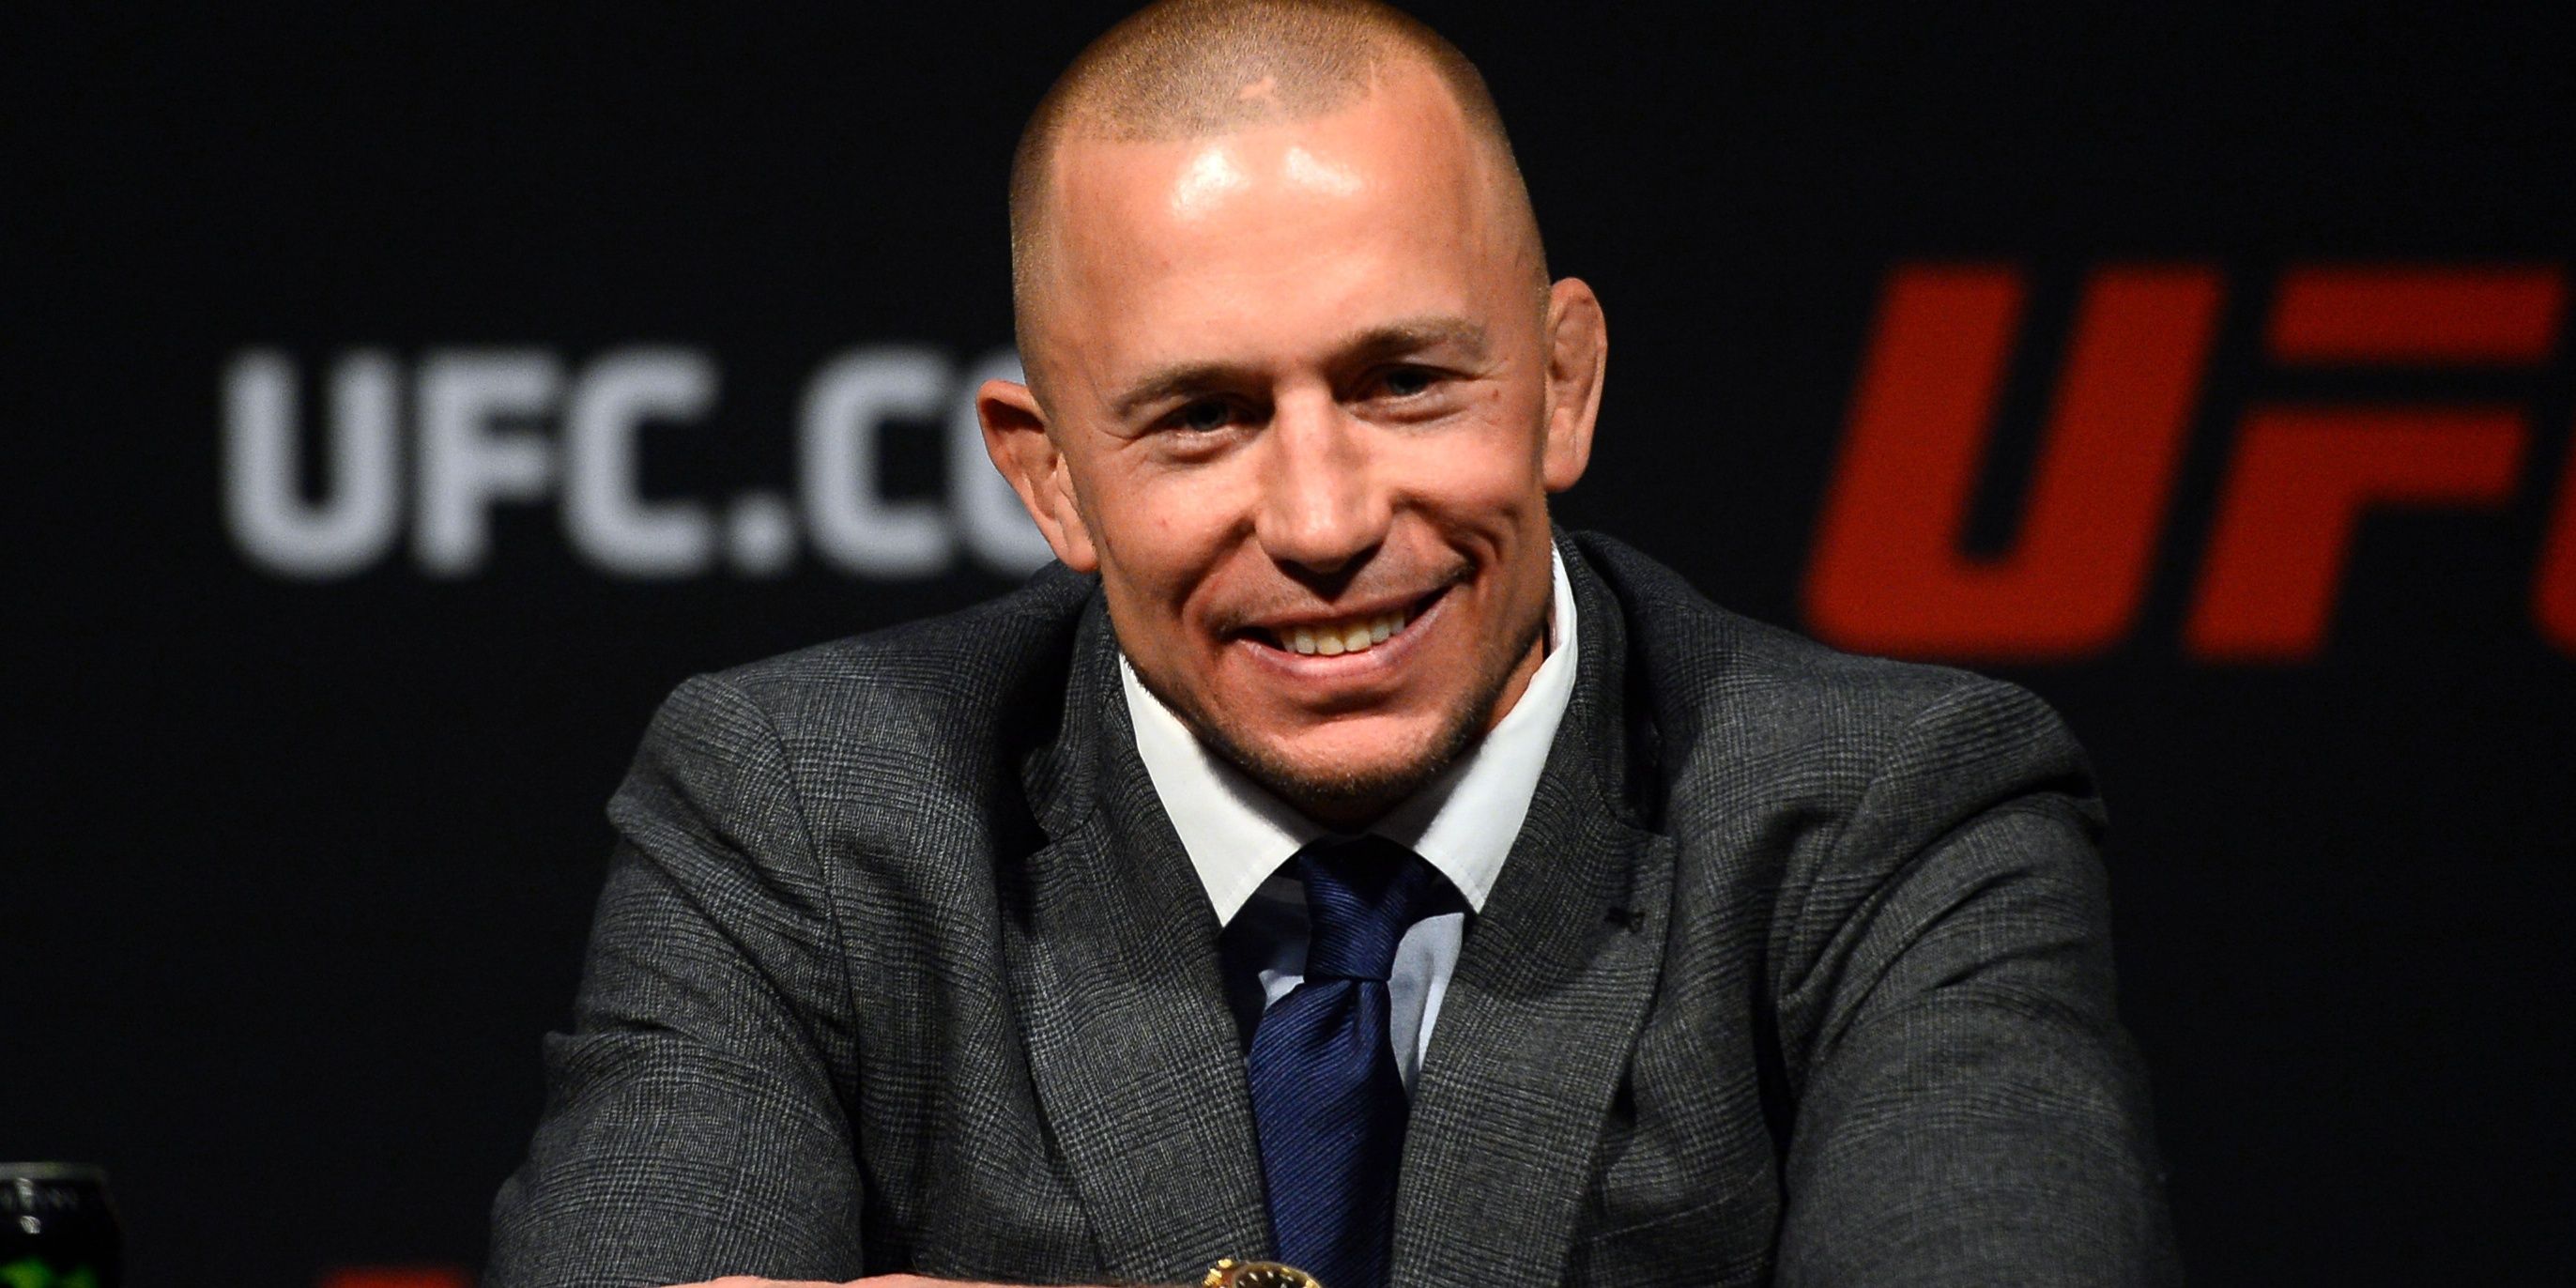 GSP in a suit at a press conference, smiling